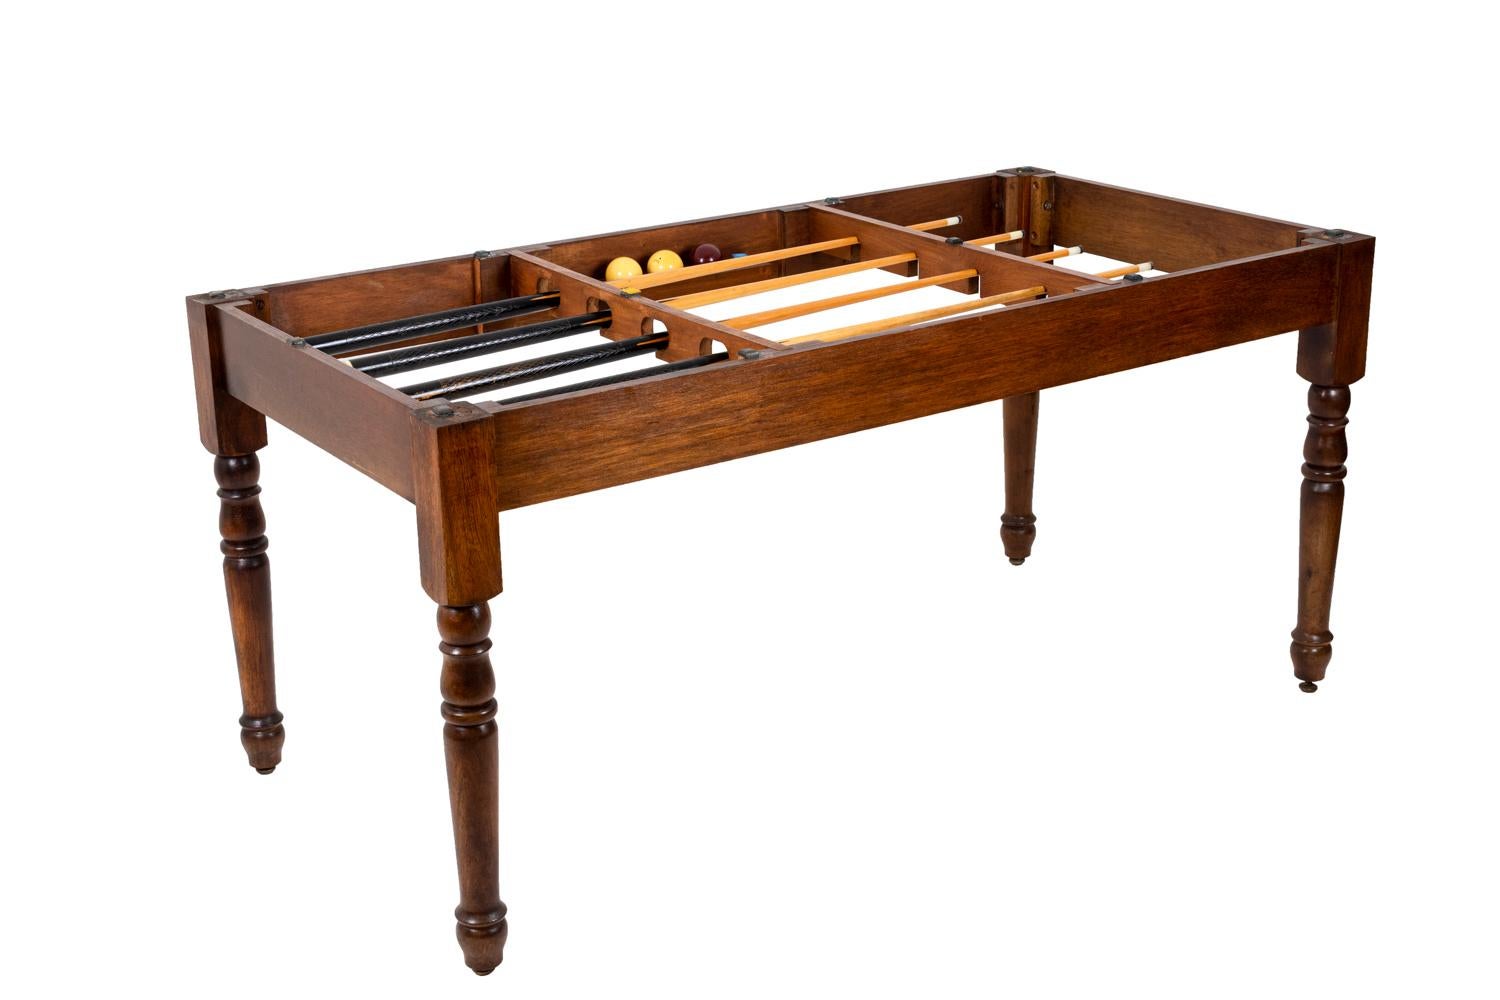 1950s pool table